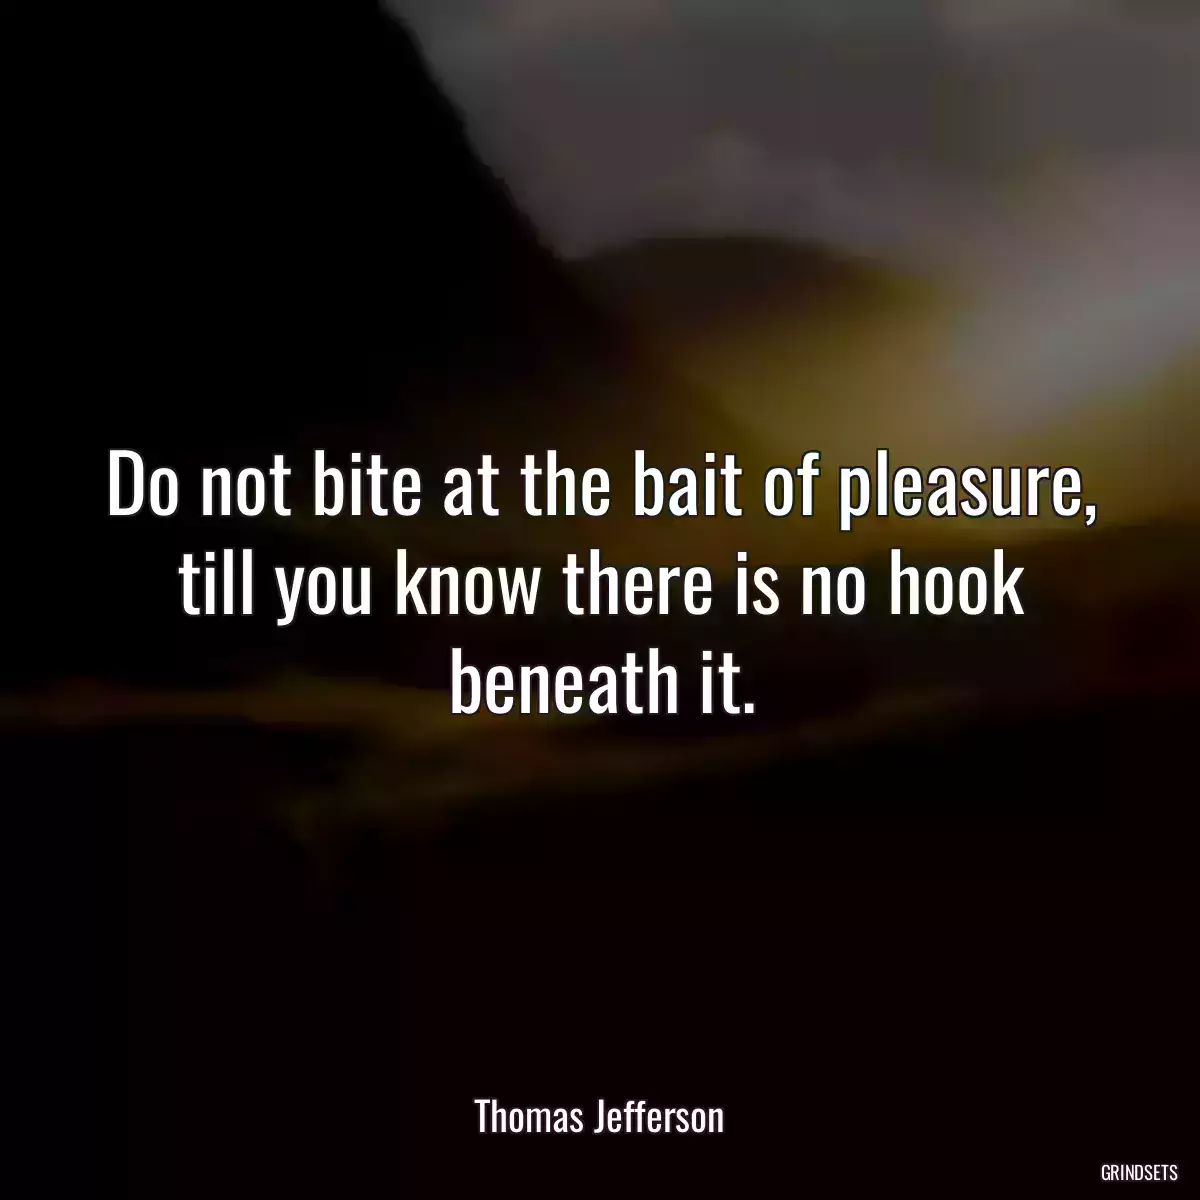 Do not bite at the bait of pleasure, till you know there is no hook beneath it.